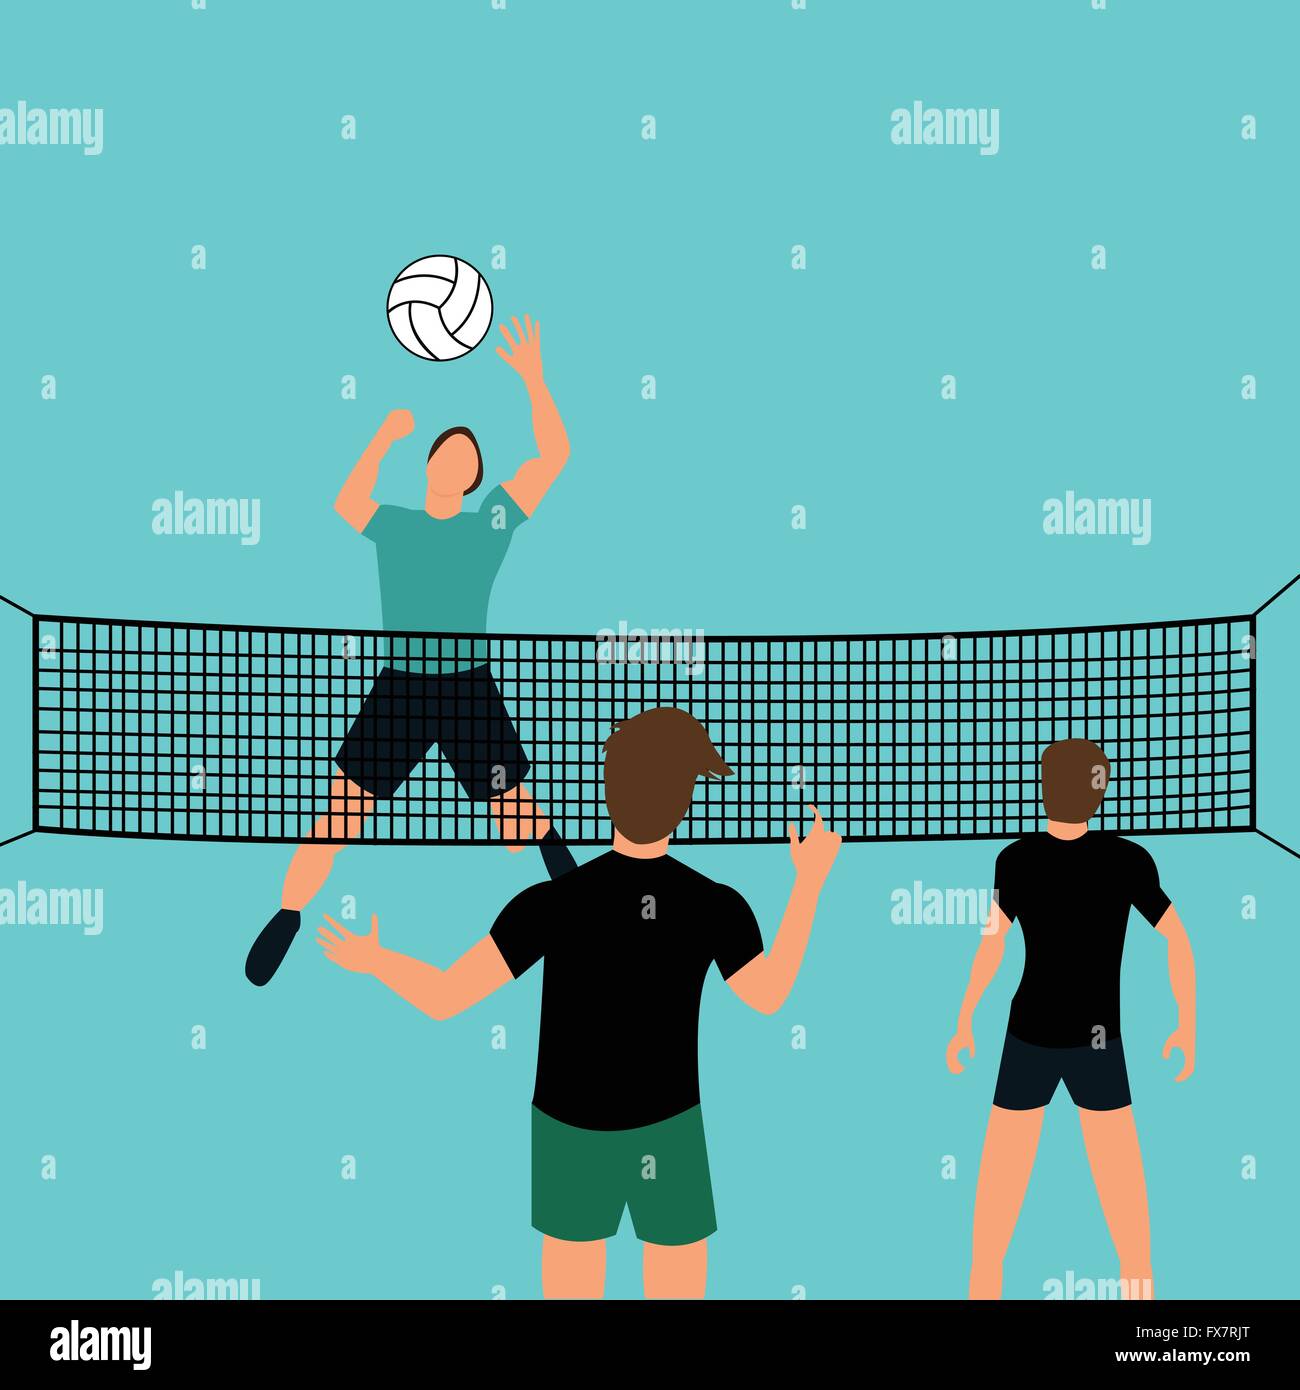 Man Team Play Volley Ball In Court With Net Jumping Smashing Defense Sport Stock Vector Image